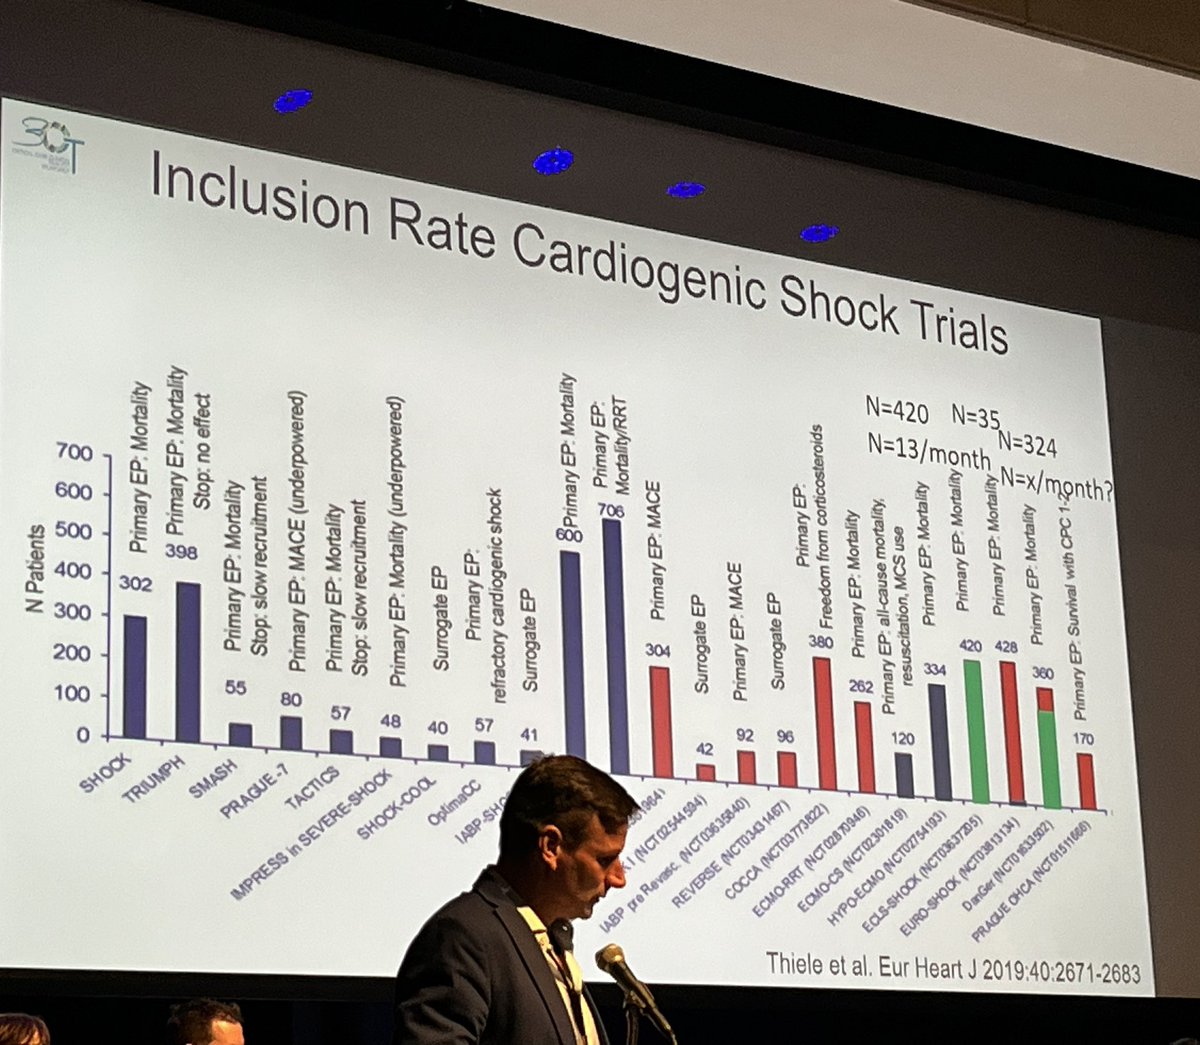 @holger_thiele summarizing  evidence on #MCS (#IABP, #Impella, #ECMO) in #cardiogenicshock. 
#3CTMeeting2023 
Limited RCTs in this space, w knowledge gaps. 
Delays in deimplementing ineffective Tx: belief overrides evidence in shock
Look forward to his #ECLS-Shock LBCT at #ESC23